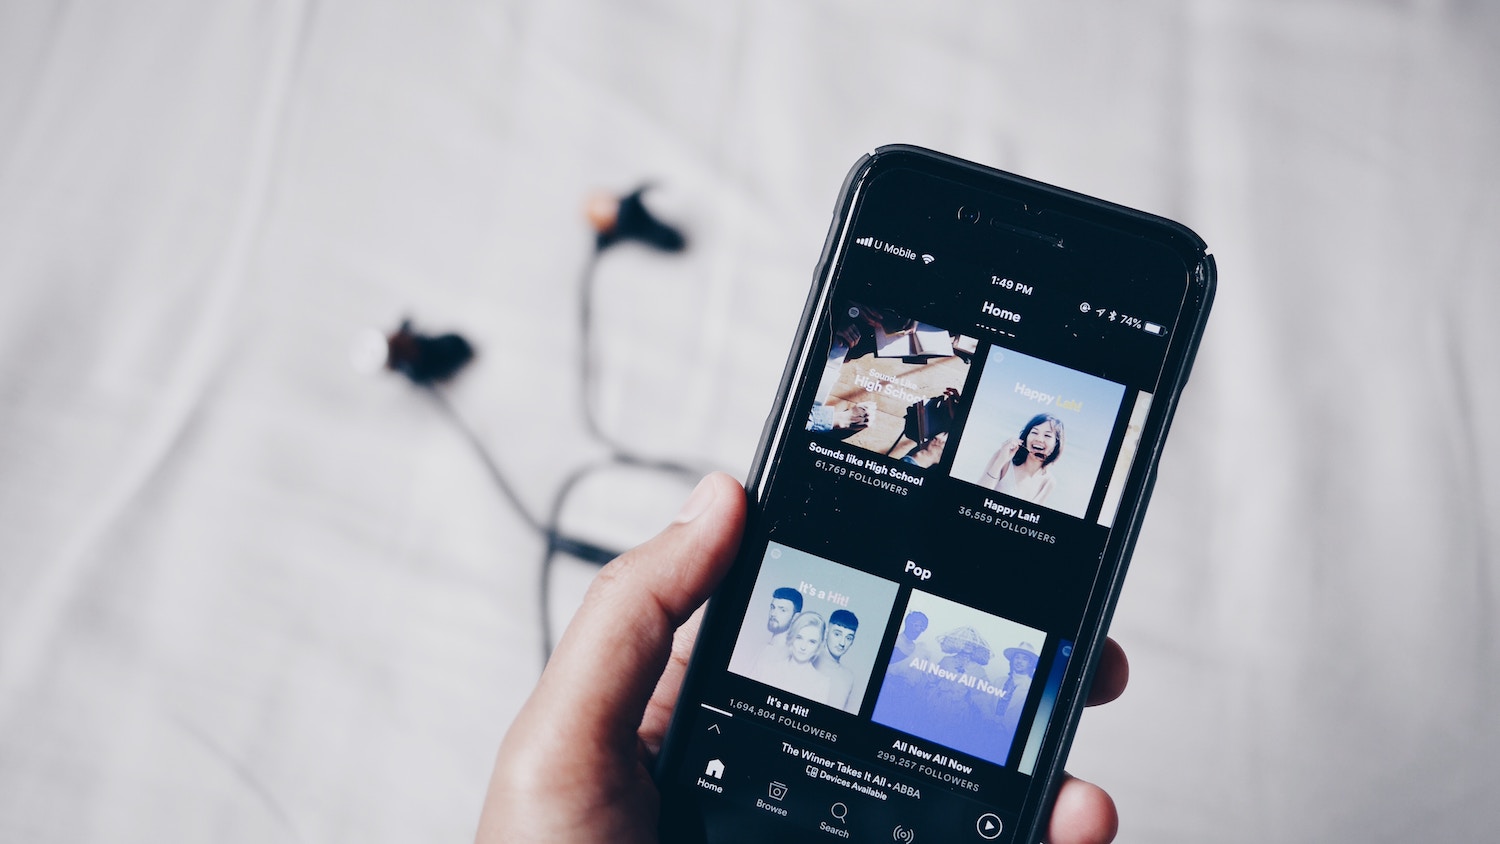 Spotify adds 8m subscribers in Q2 to reach 83m, expects 97m by end of the year